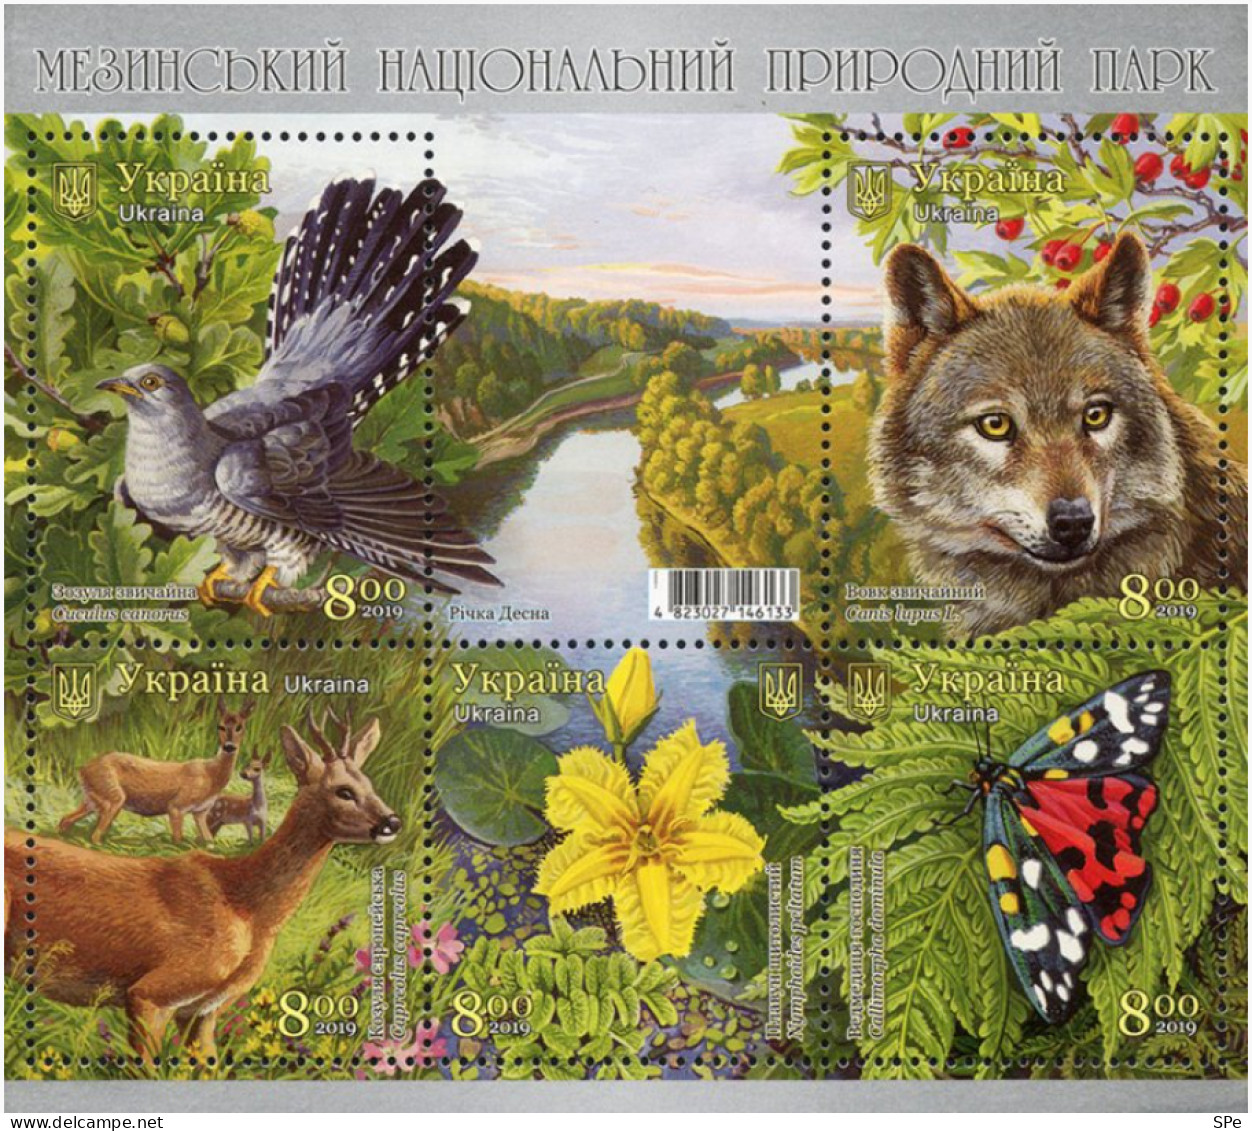 Ukraine 2019 Mezinsky National Natural Park Flora And Fauna Set Of 5 Stamps In Block - Cuco, Cuclillos